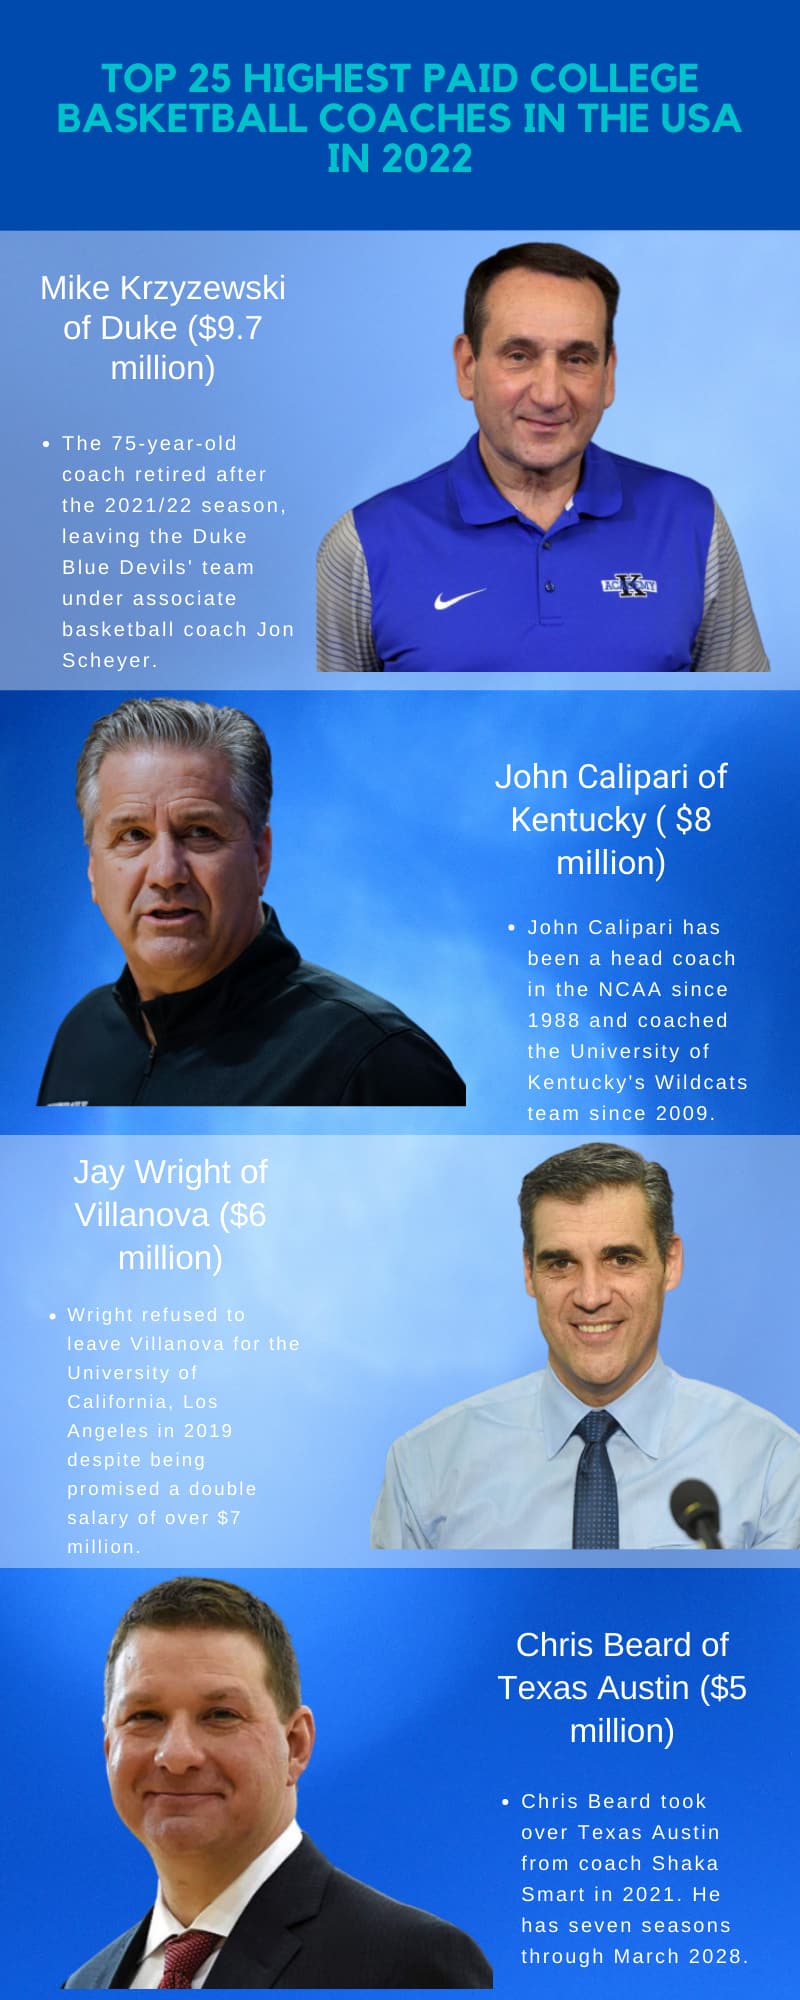 Top 25 highest paid college basketball coaches in the USA 2022 -  